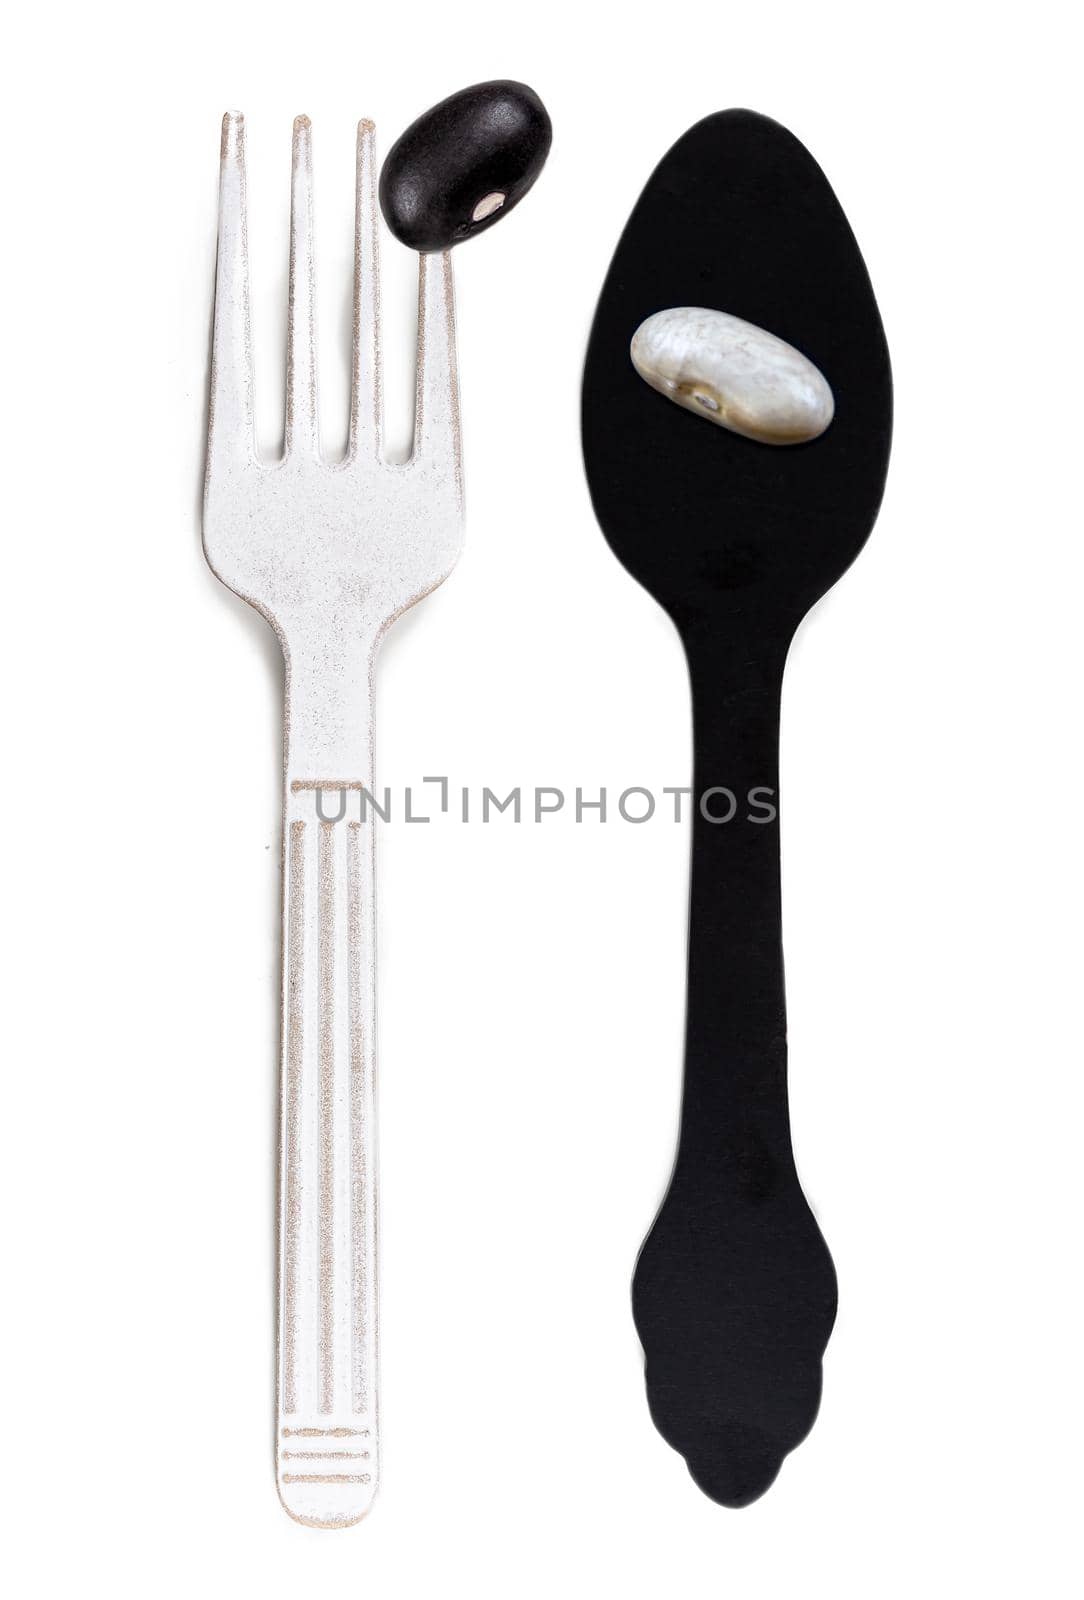 White bean and black bean on spoon and fouchette - Inverted tones.